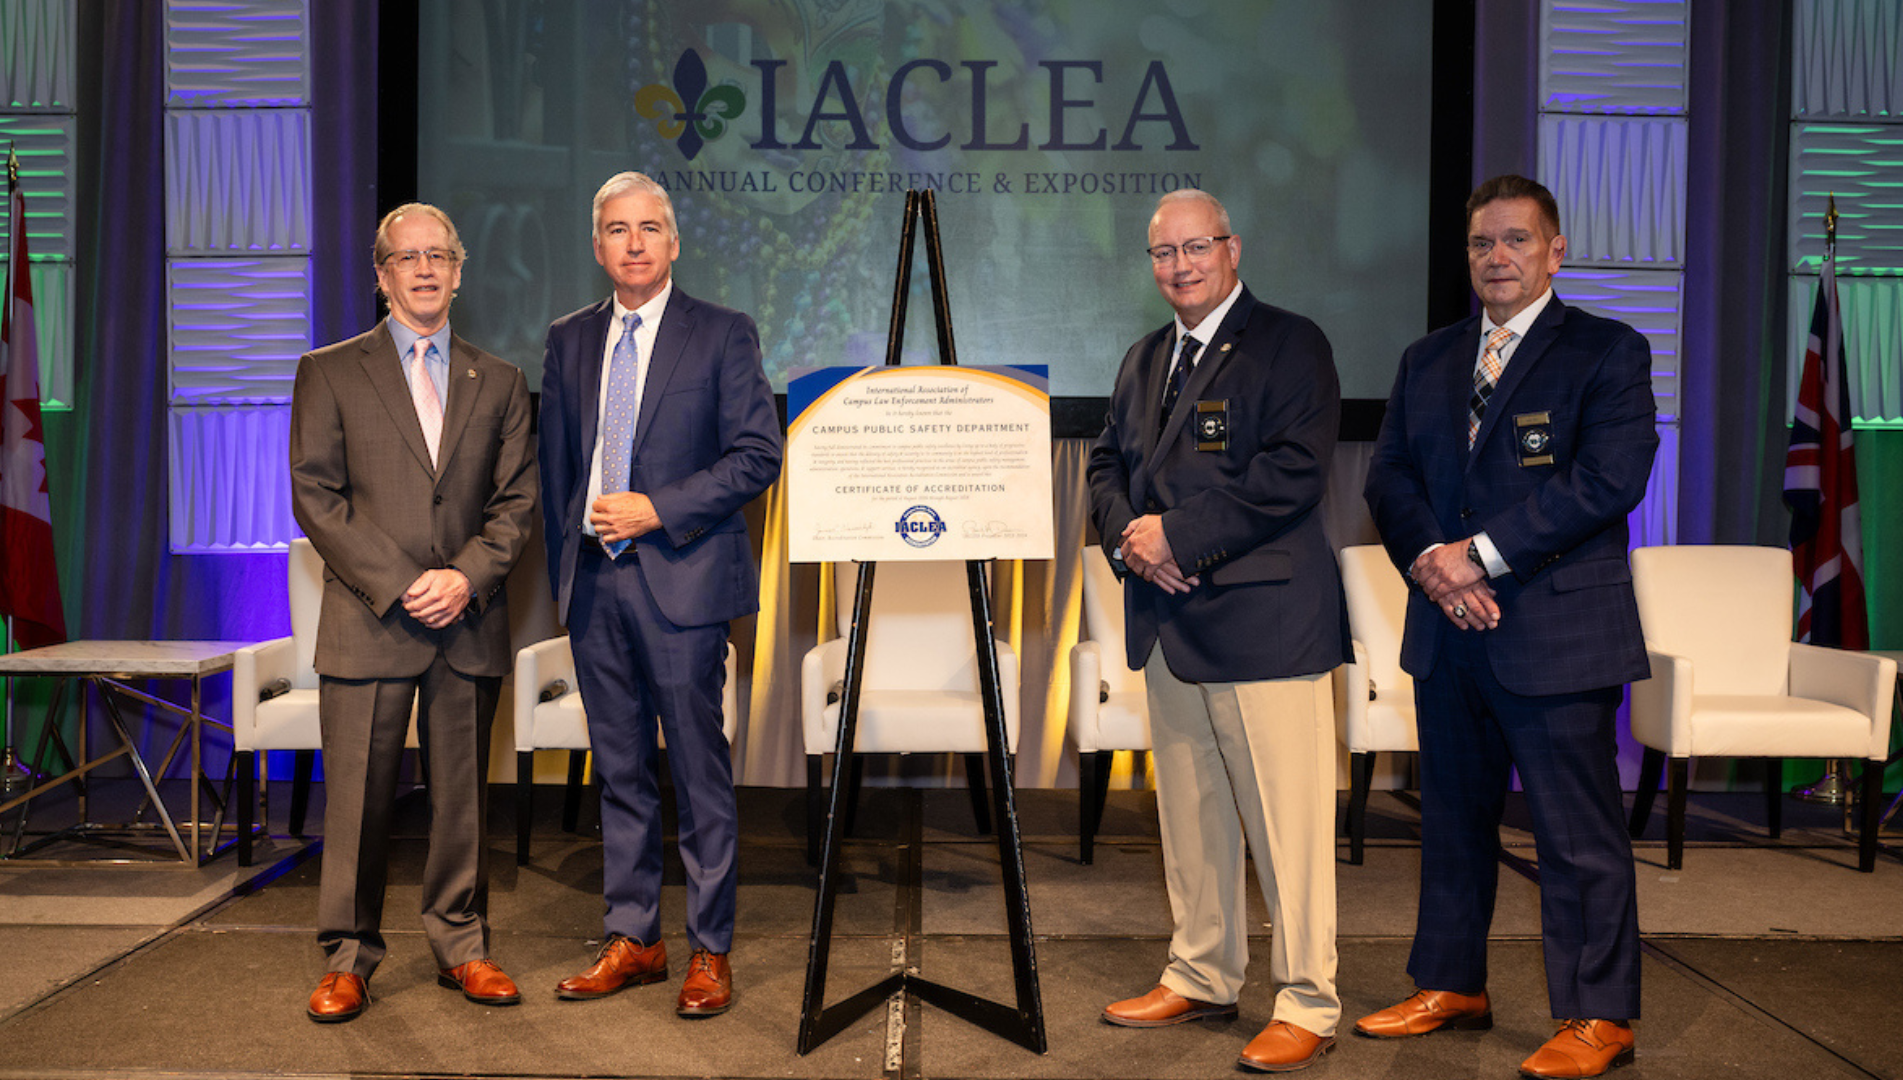 Security & Safety Executive Director Dennis McCauley, Bucks County Community College accepts the International Association of Campus Law Enforcement Administrators (IACLEA) Certificate of Accreditation from IACLEA President Paul Dean and IACLEA Executive Director Paul Cell